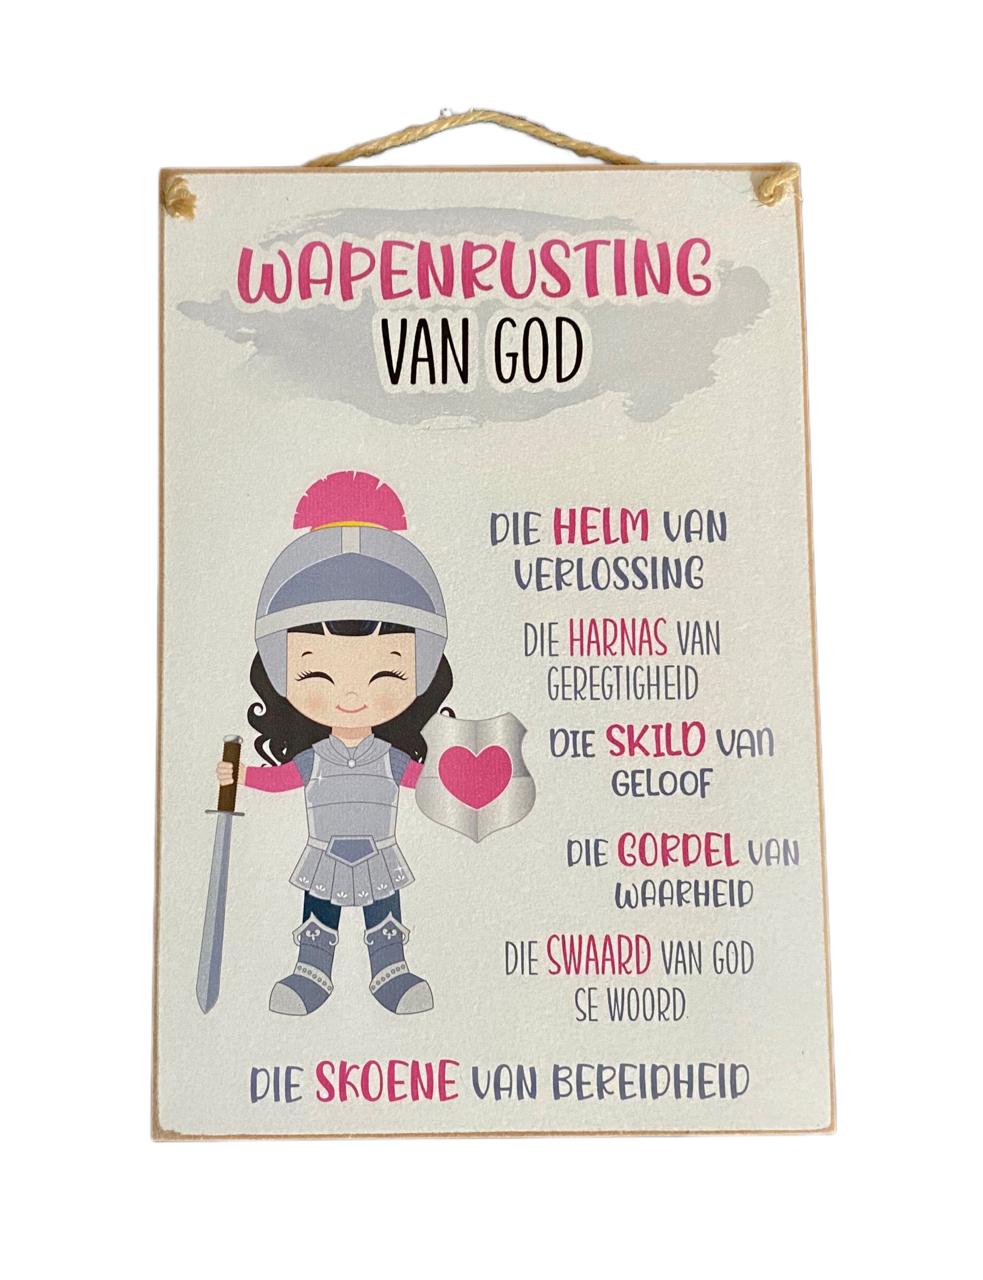 Small Sign (A4) – Wapenrusting van God Dogter